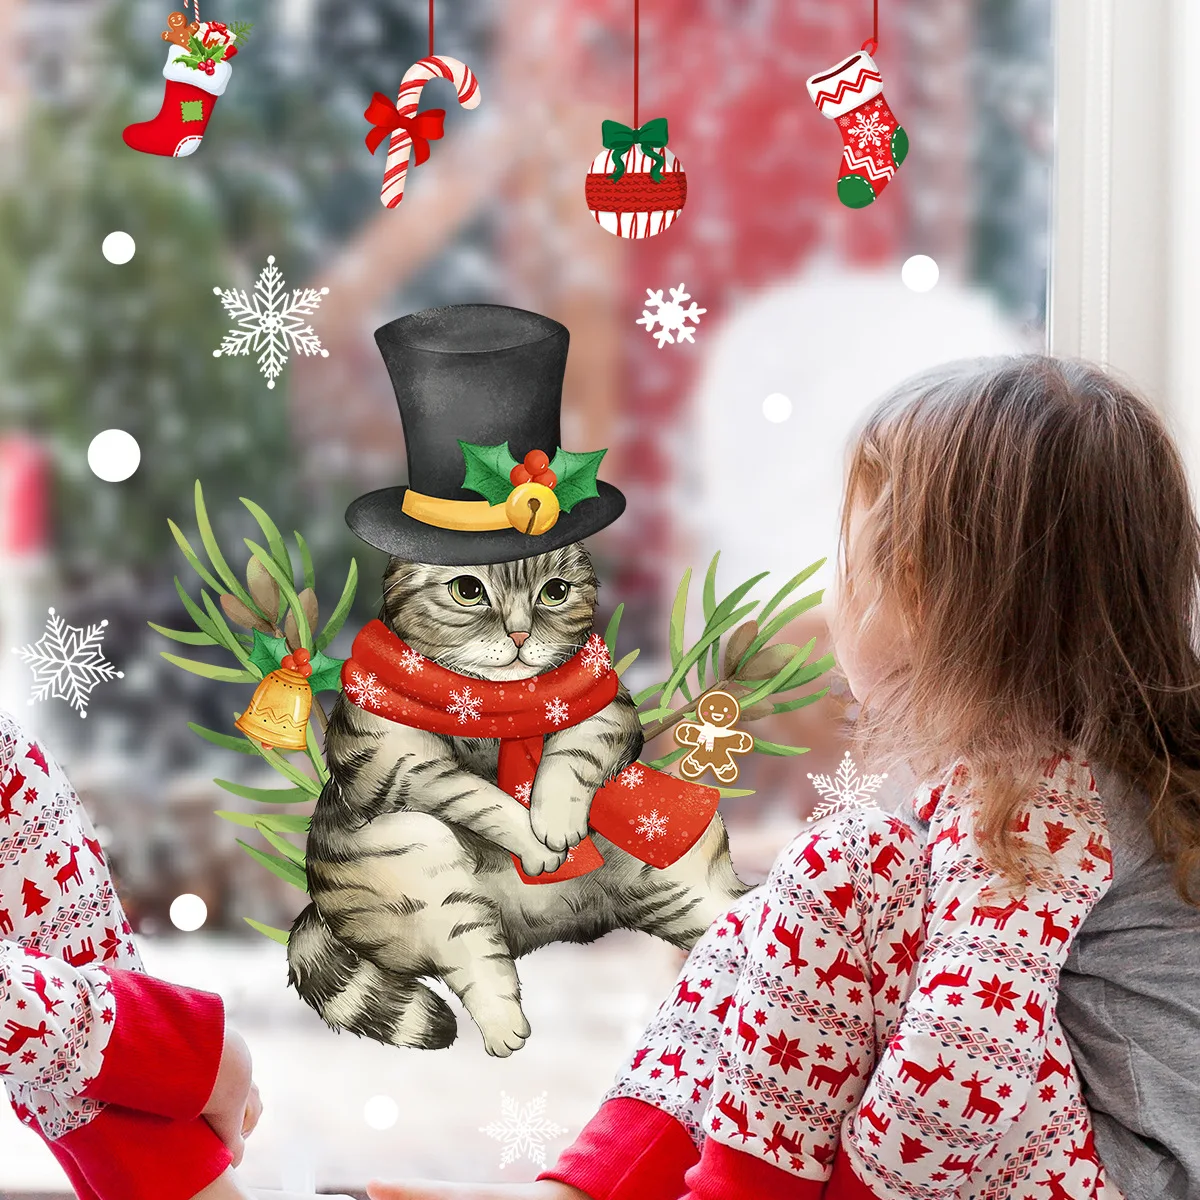 30*35cm Christmas Naughty Kitten Glass Window Wall Sticker Glass Sticker Christmas Atmosphere Decorative Wall Sticker Ct3028 french atmosphere red wine glass champagne glass high aesthetic value tall glass high end feeling slightly tipsy wine glass